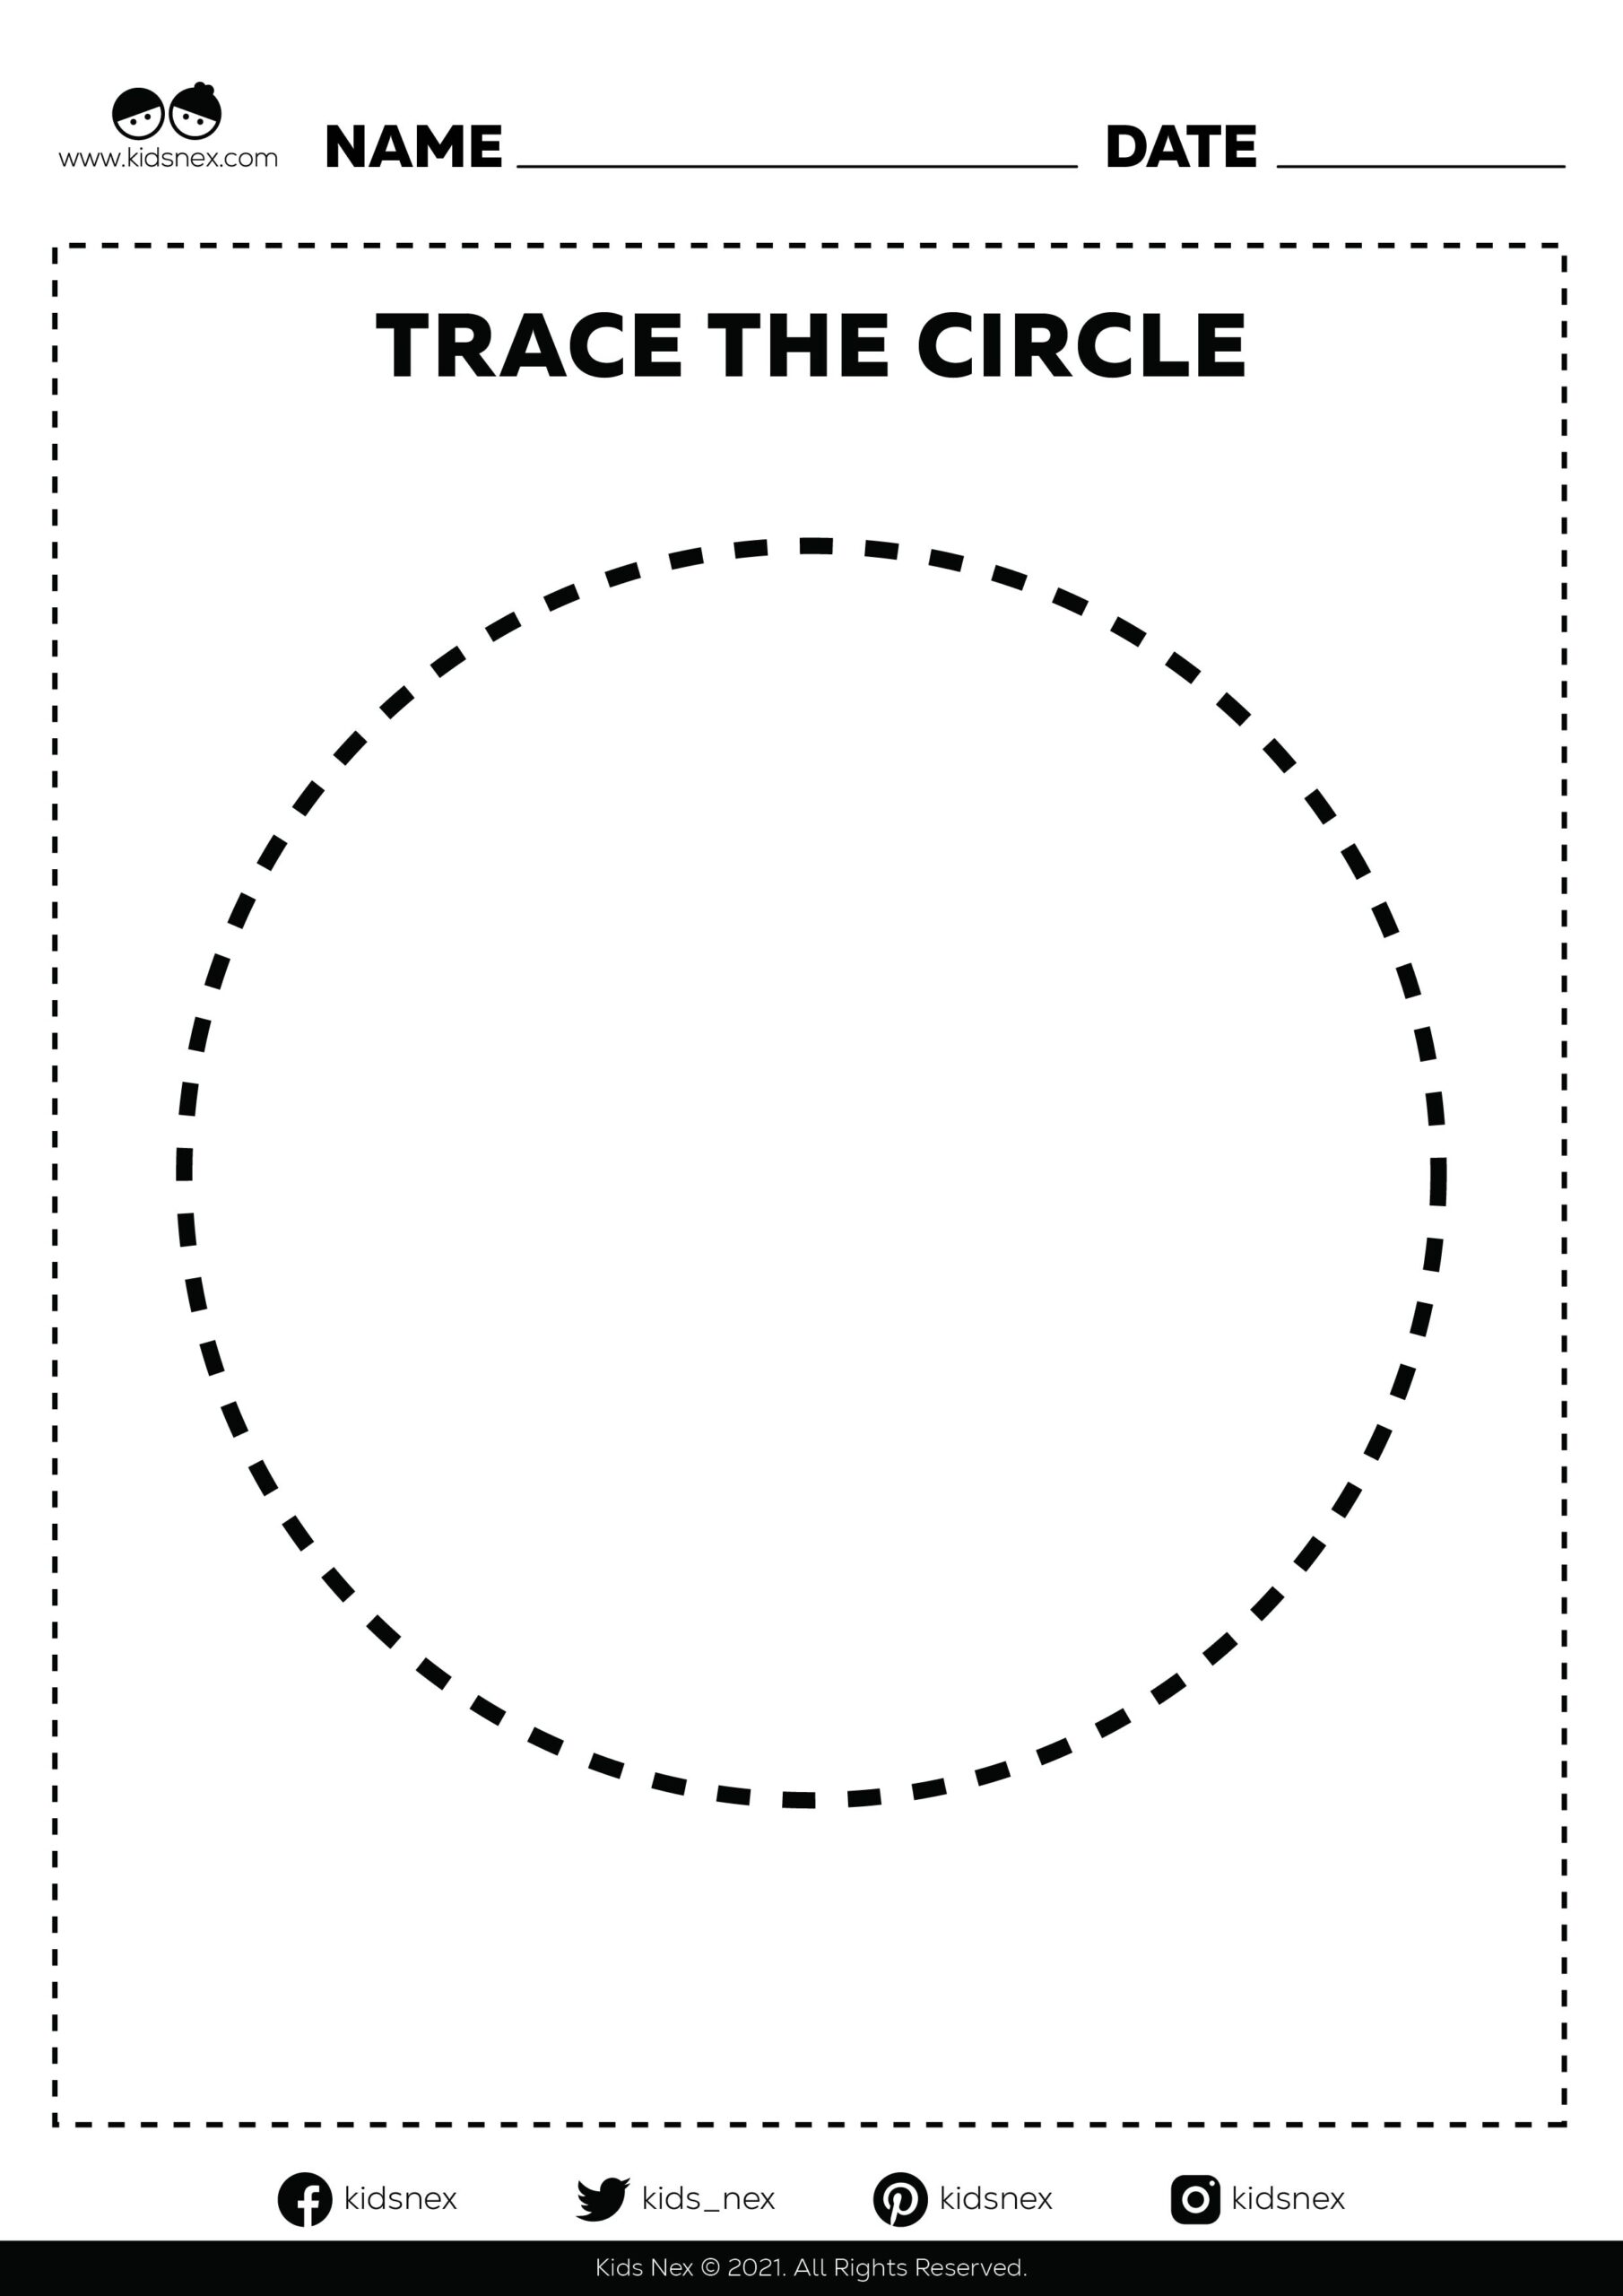 Free printable trace and circle worksheet for preschoolers and kindergarten kids for easy activities